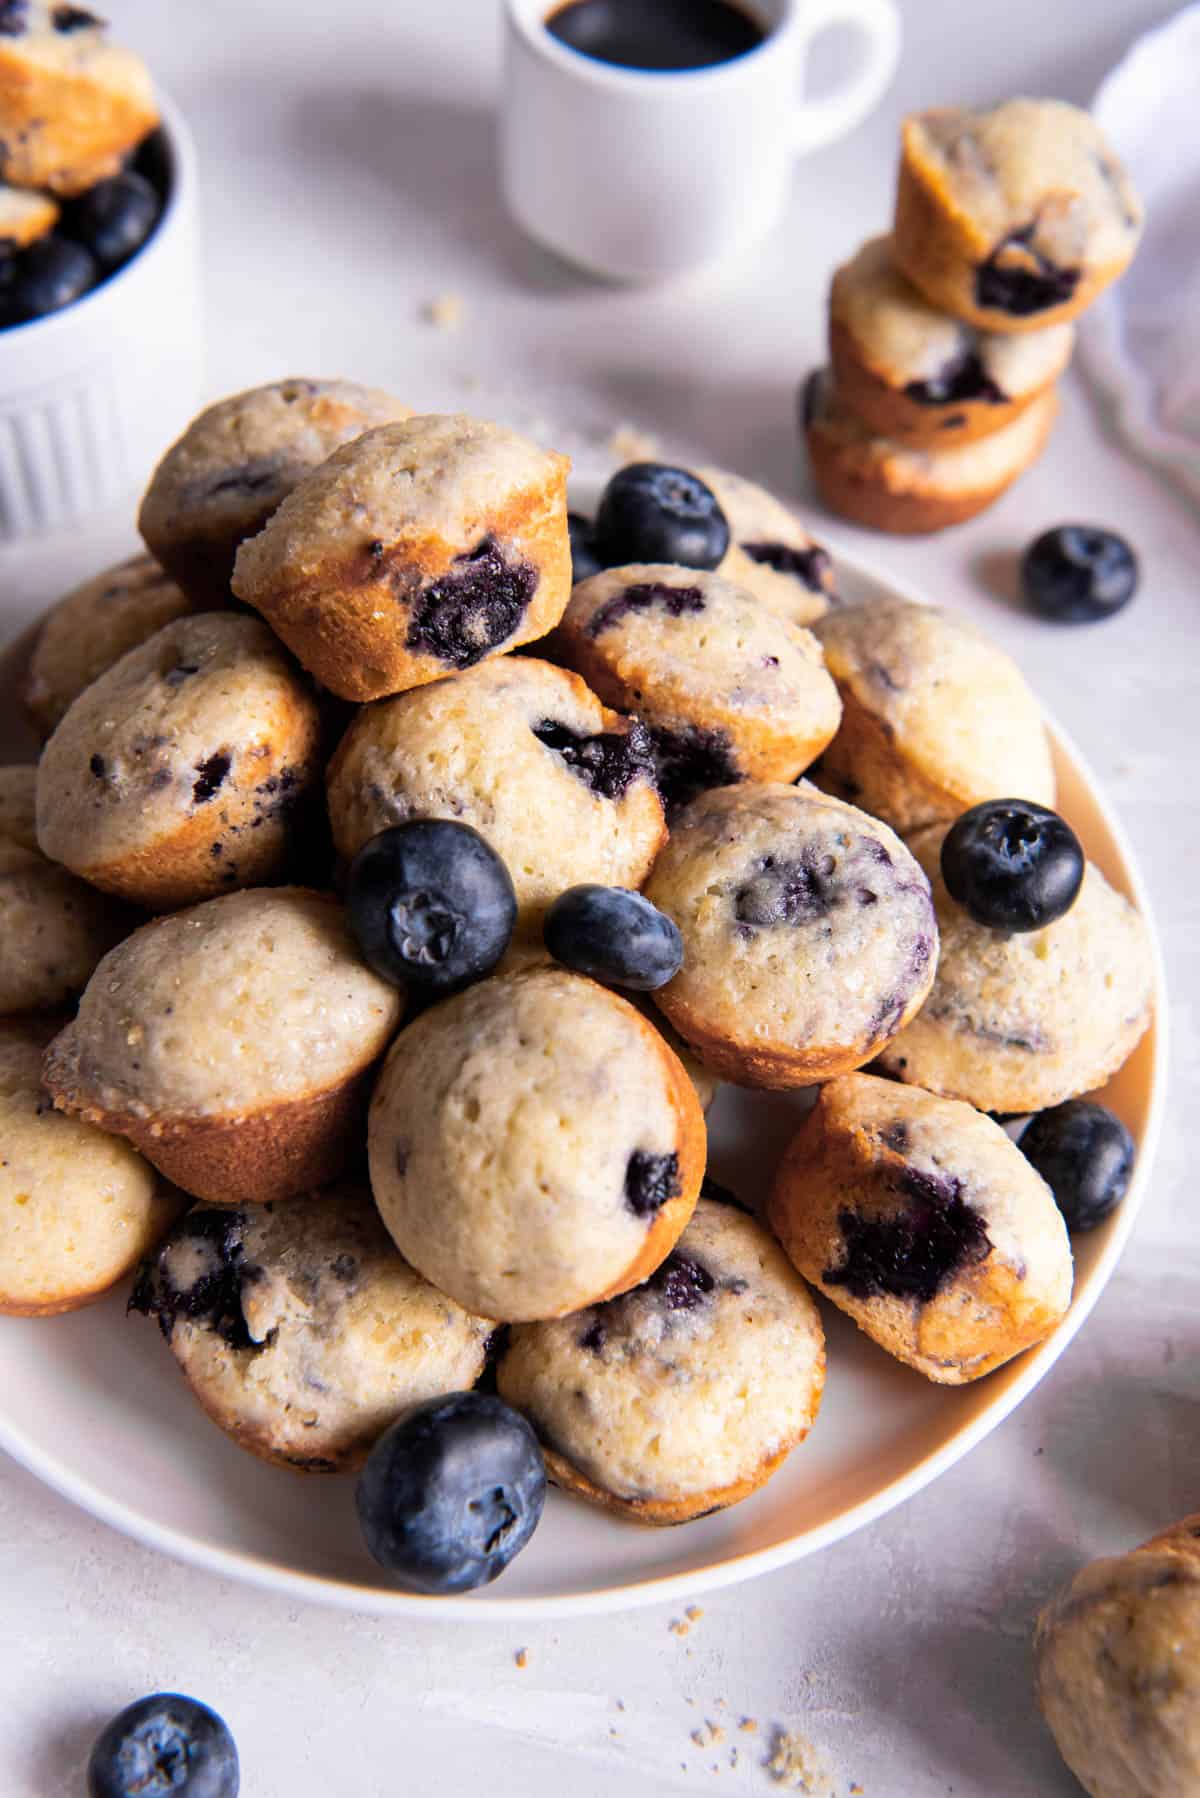 Mini blueberry muffins piled high on a white plate. Fresh blueberries are scattered on top of the mini muffins for serving.